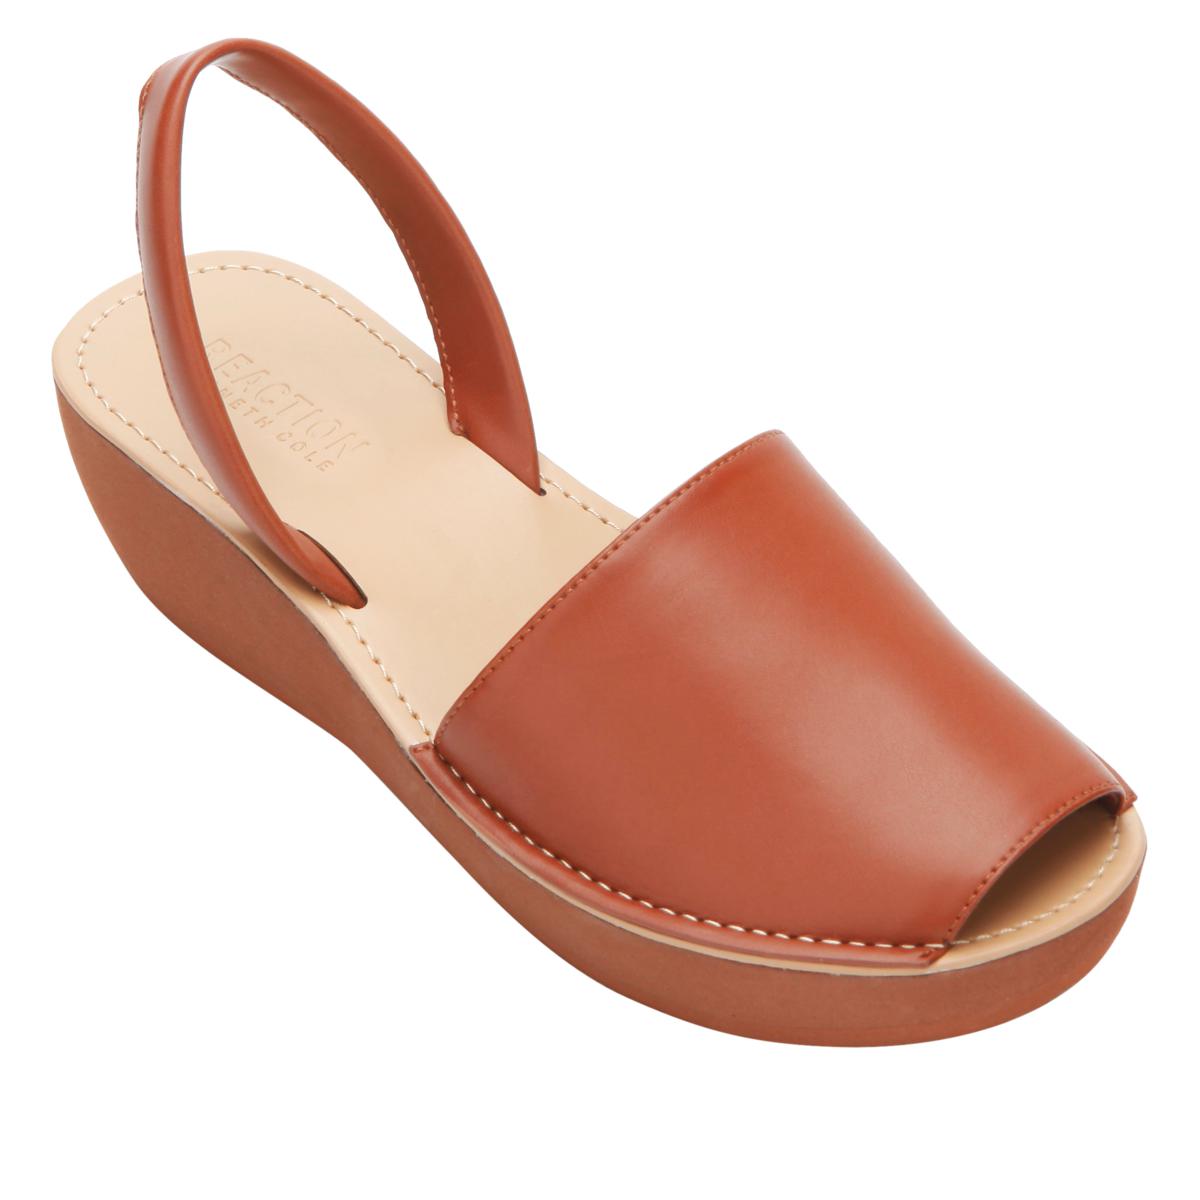 kenneth cole reaction sandals